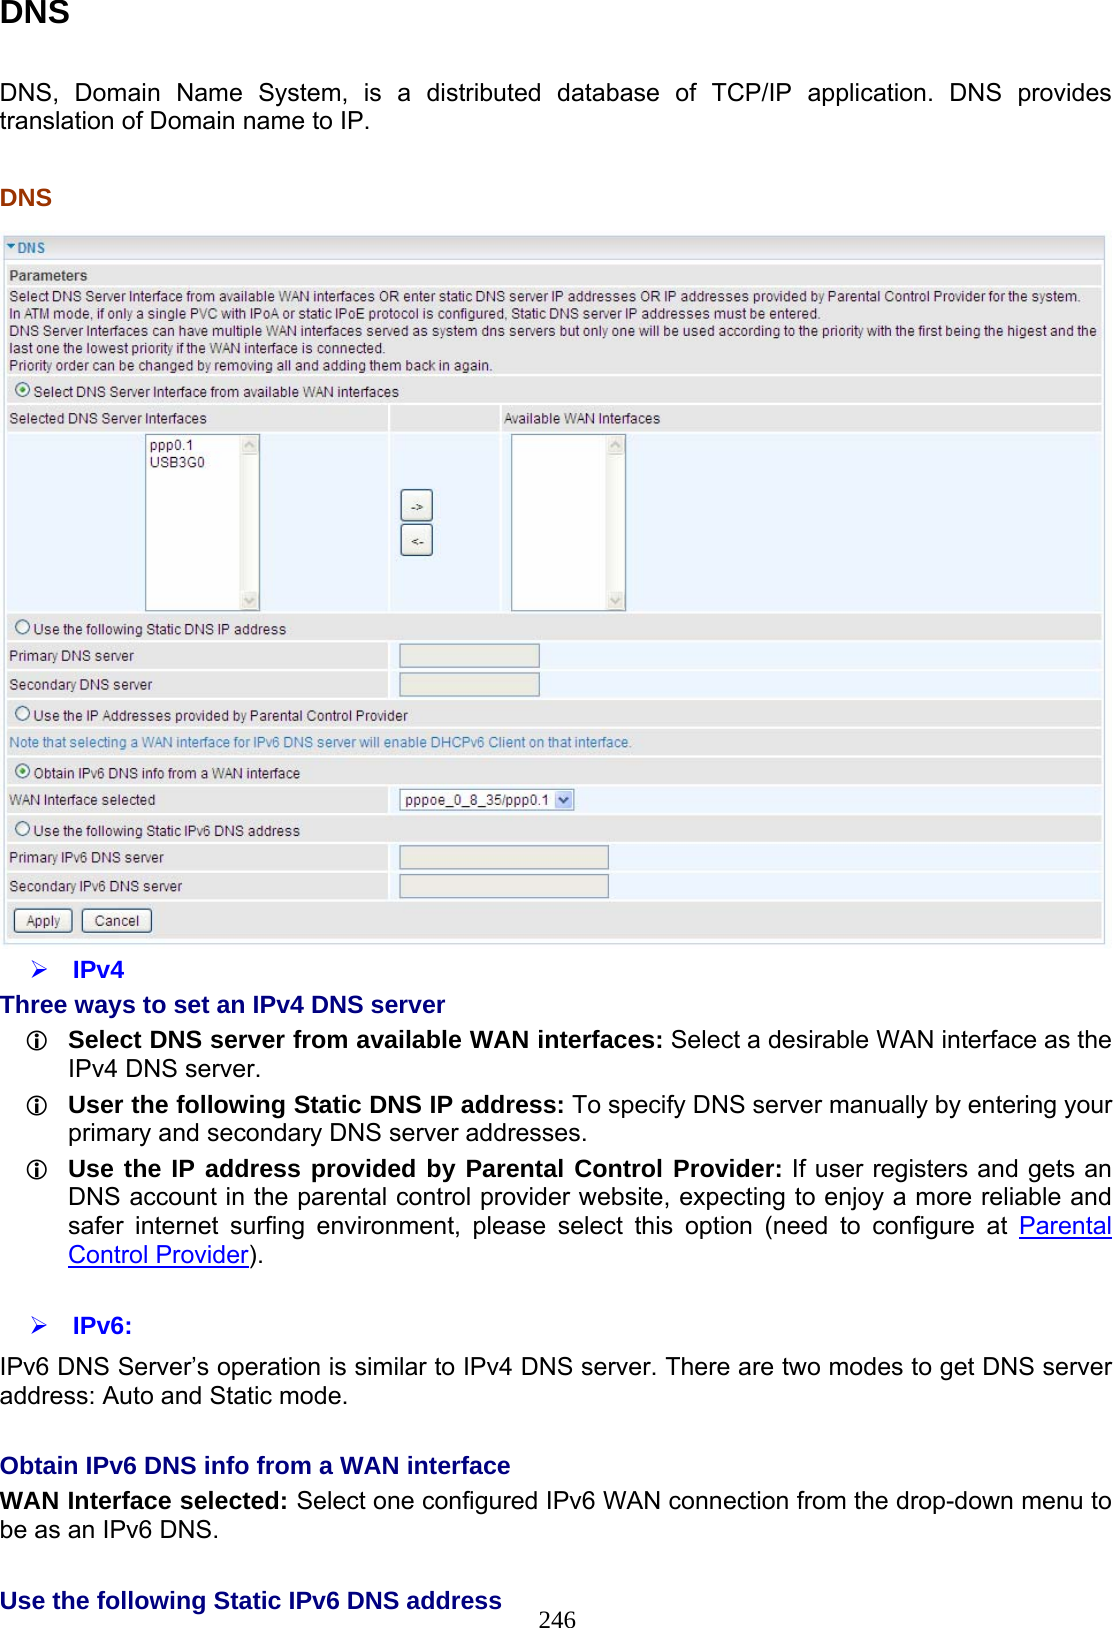 246 DNS  DNS, Domain Name System, is a distributed database of TCP/IP application. DNS provides translation of Domain name to IP.   DNS    IPv4 Three ways to set an IPv4 DNS server  Select DNS server from available WAN interfaces: Select a desirable WAN interface as the IPv4 DNS server.  User the following Static DNS IP address: To specify DNS server manually by entering your primary and secondary DNS server addresses.  Use the IP address provided by Parental Control Provider: If user registers and gets an DNS account in the parental control provider website, expecting to enjoy a more reliable and safer internet surfing environment, please select this option (need to configure at Parental Control Provider).   IPv6: IPv6 DNS Server’s operation is similar to IPv4 DNS server. There are two modes to get DNS server address: Auto and Static mode.  Obtain IPv6 DNS info from a WAN interface WAN Interface selected: Select one configured IPv6 WAN connection from the drop-down menu to be as an IPv6 DNS.   Use the following Static IPv6 DNS address 